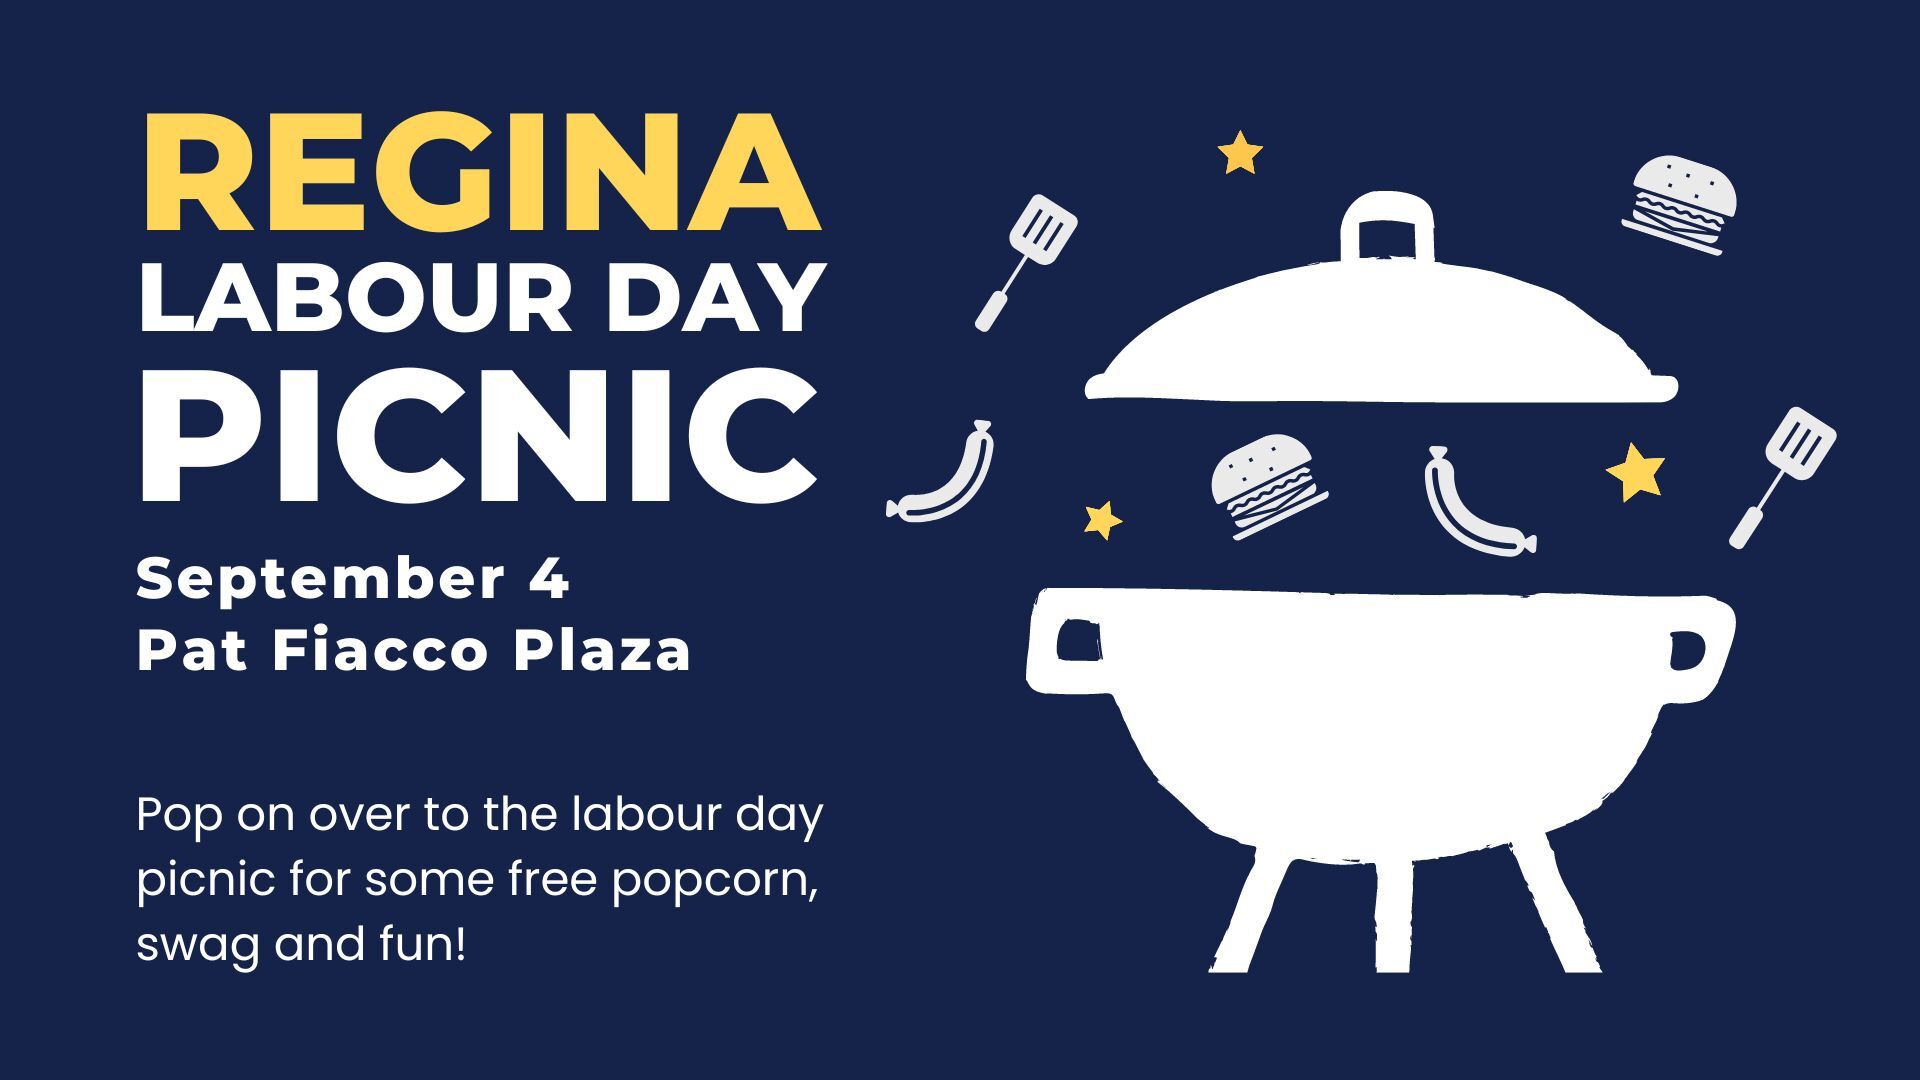 Graphic of a dome-shaped barbeque with text promoting the Labour Day Picnic in Regina.